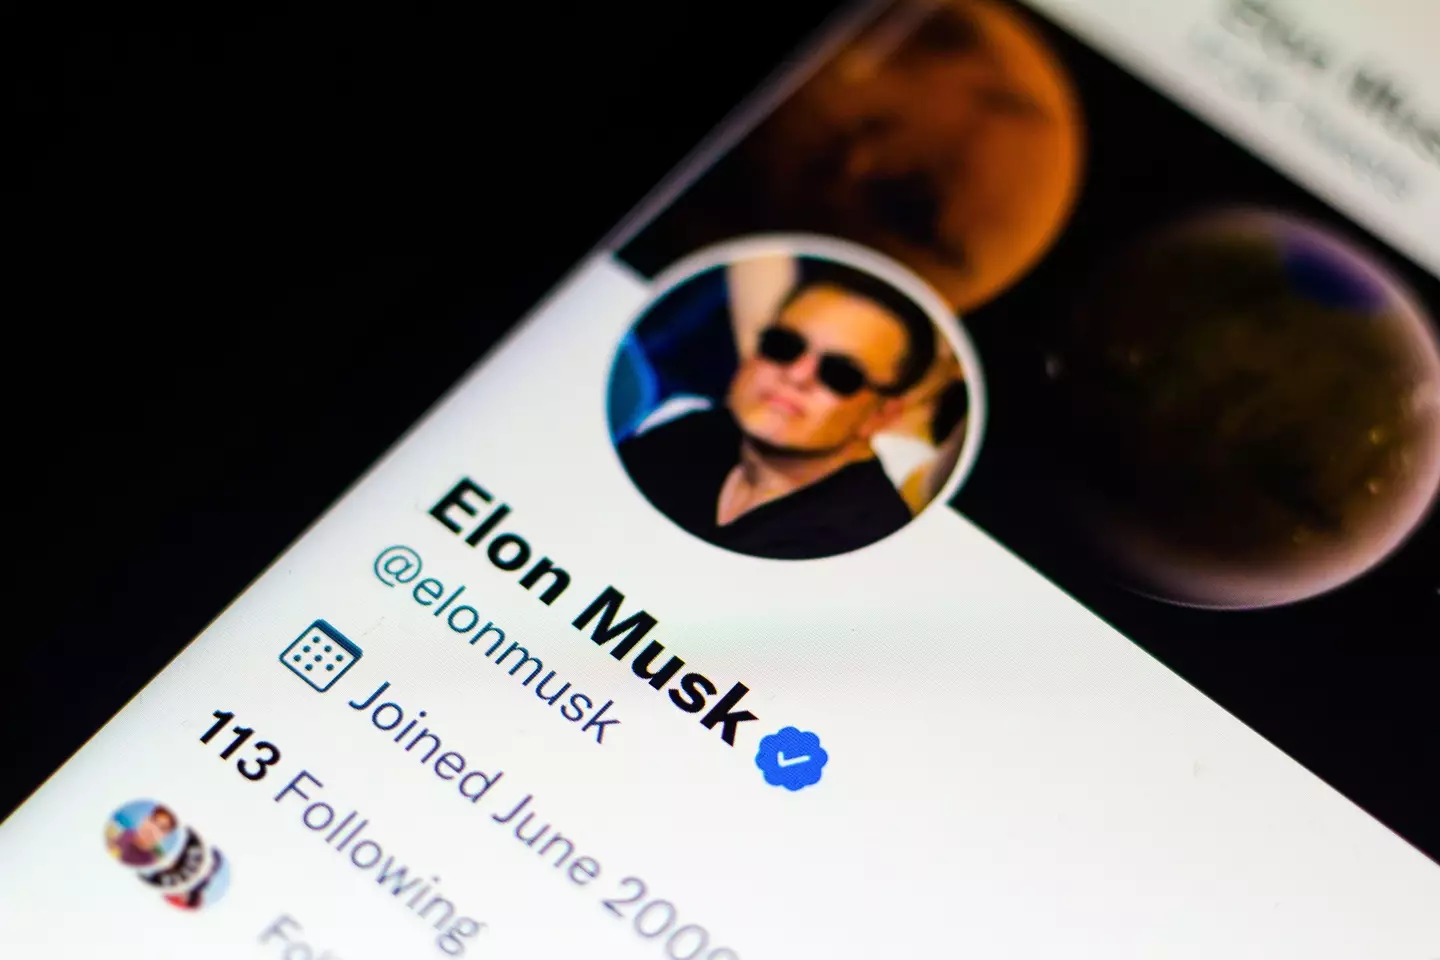 Elon Musk has offered to buy Twitter.